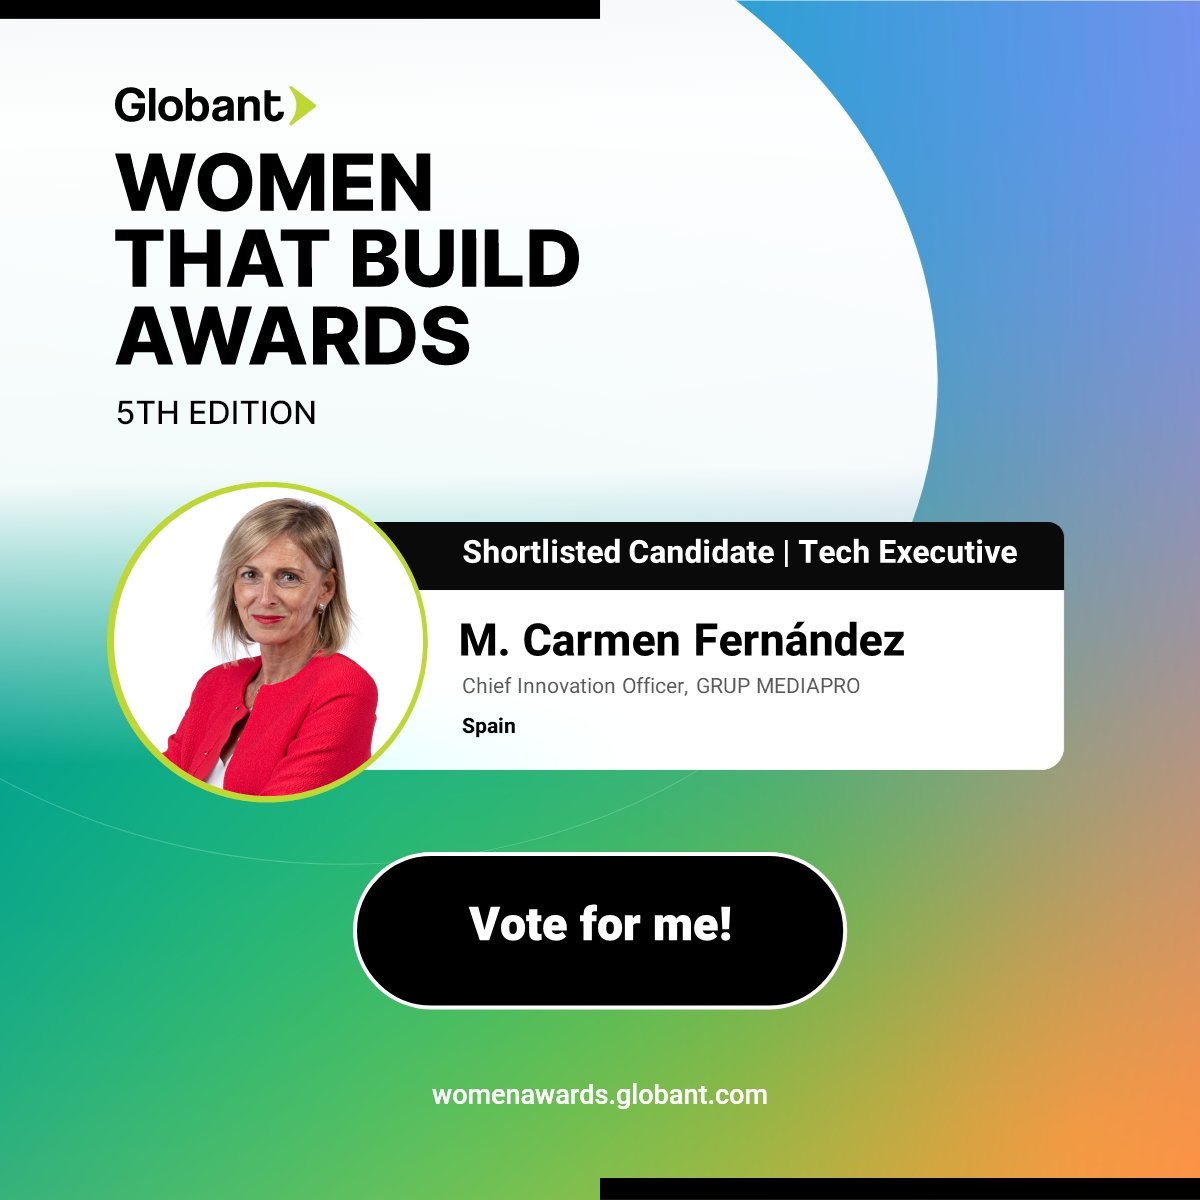 María Carmen Fernández, Director of Innovation at GRUP MEDIAPRO, is a nominee for @Globant's #WomenthatBuildAwards 2024 as a Tech Executive.

The awards recognize inspirational women who have made major contributions in technology.

Vote for her at globant.link/3UxKbBT